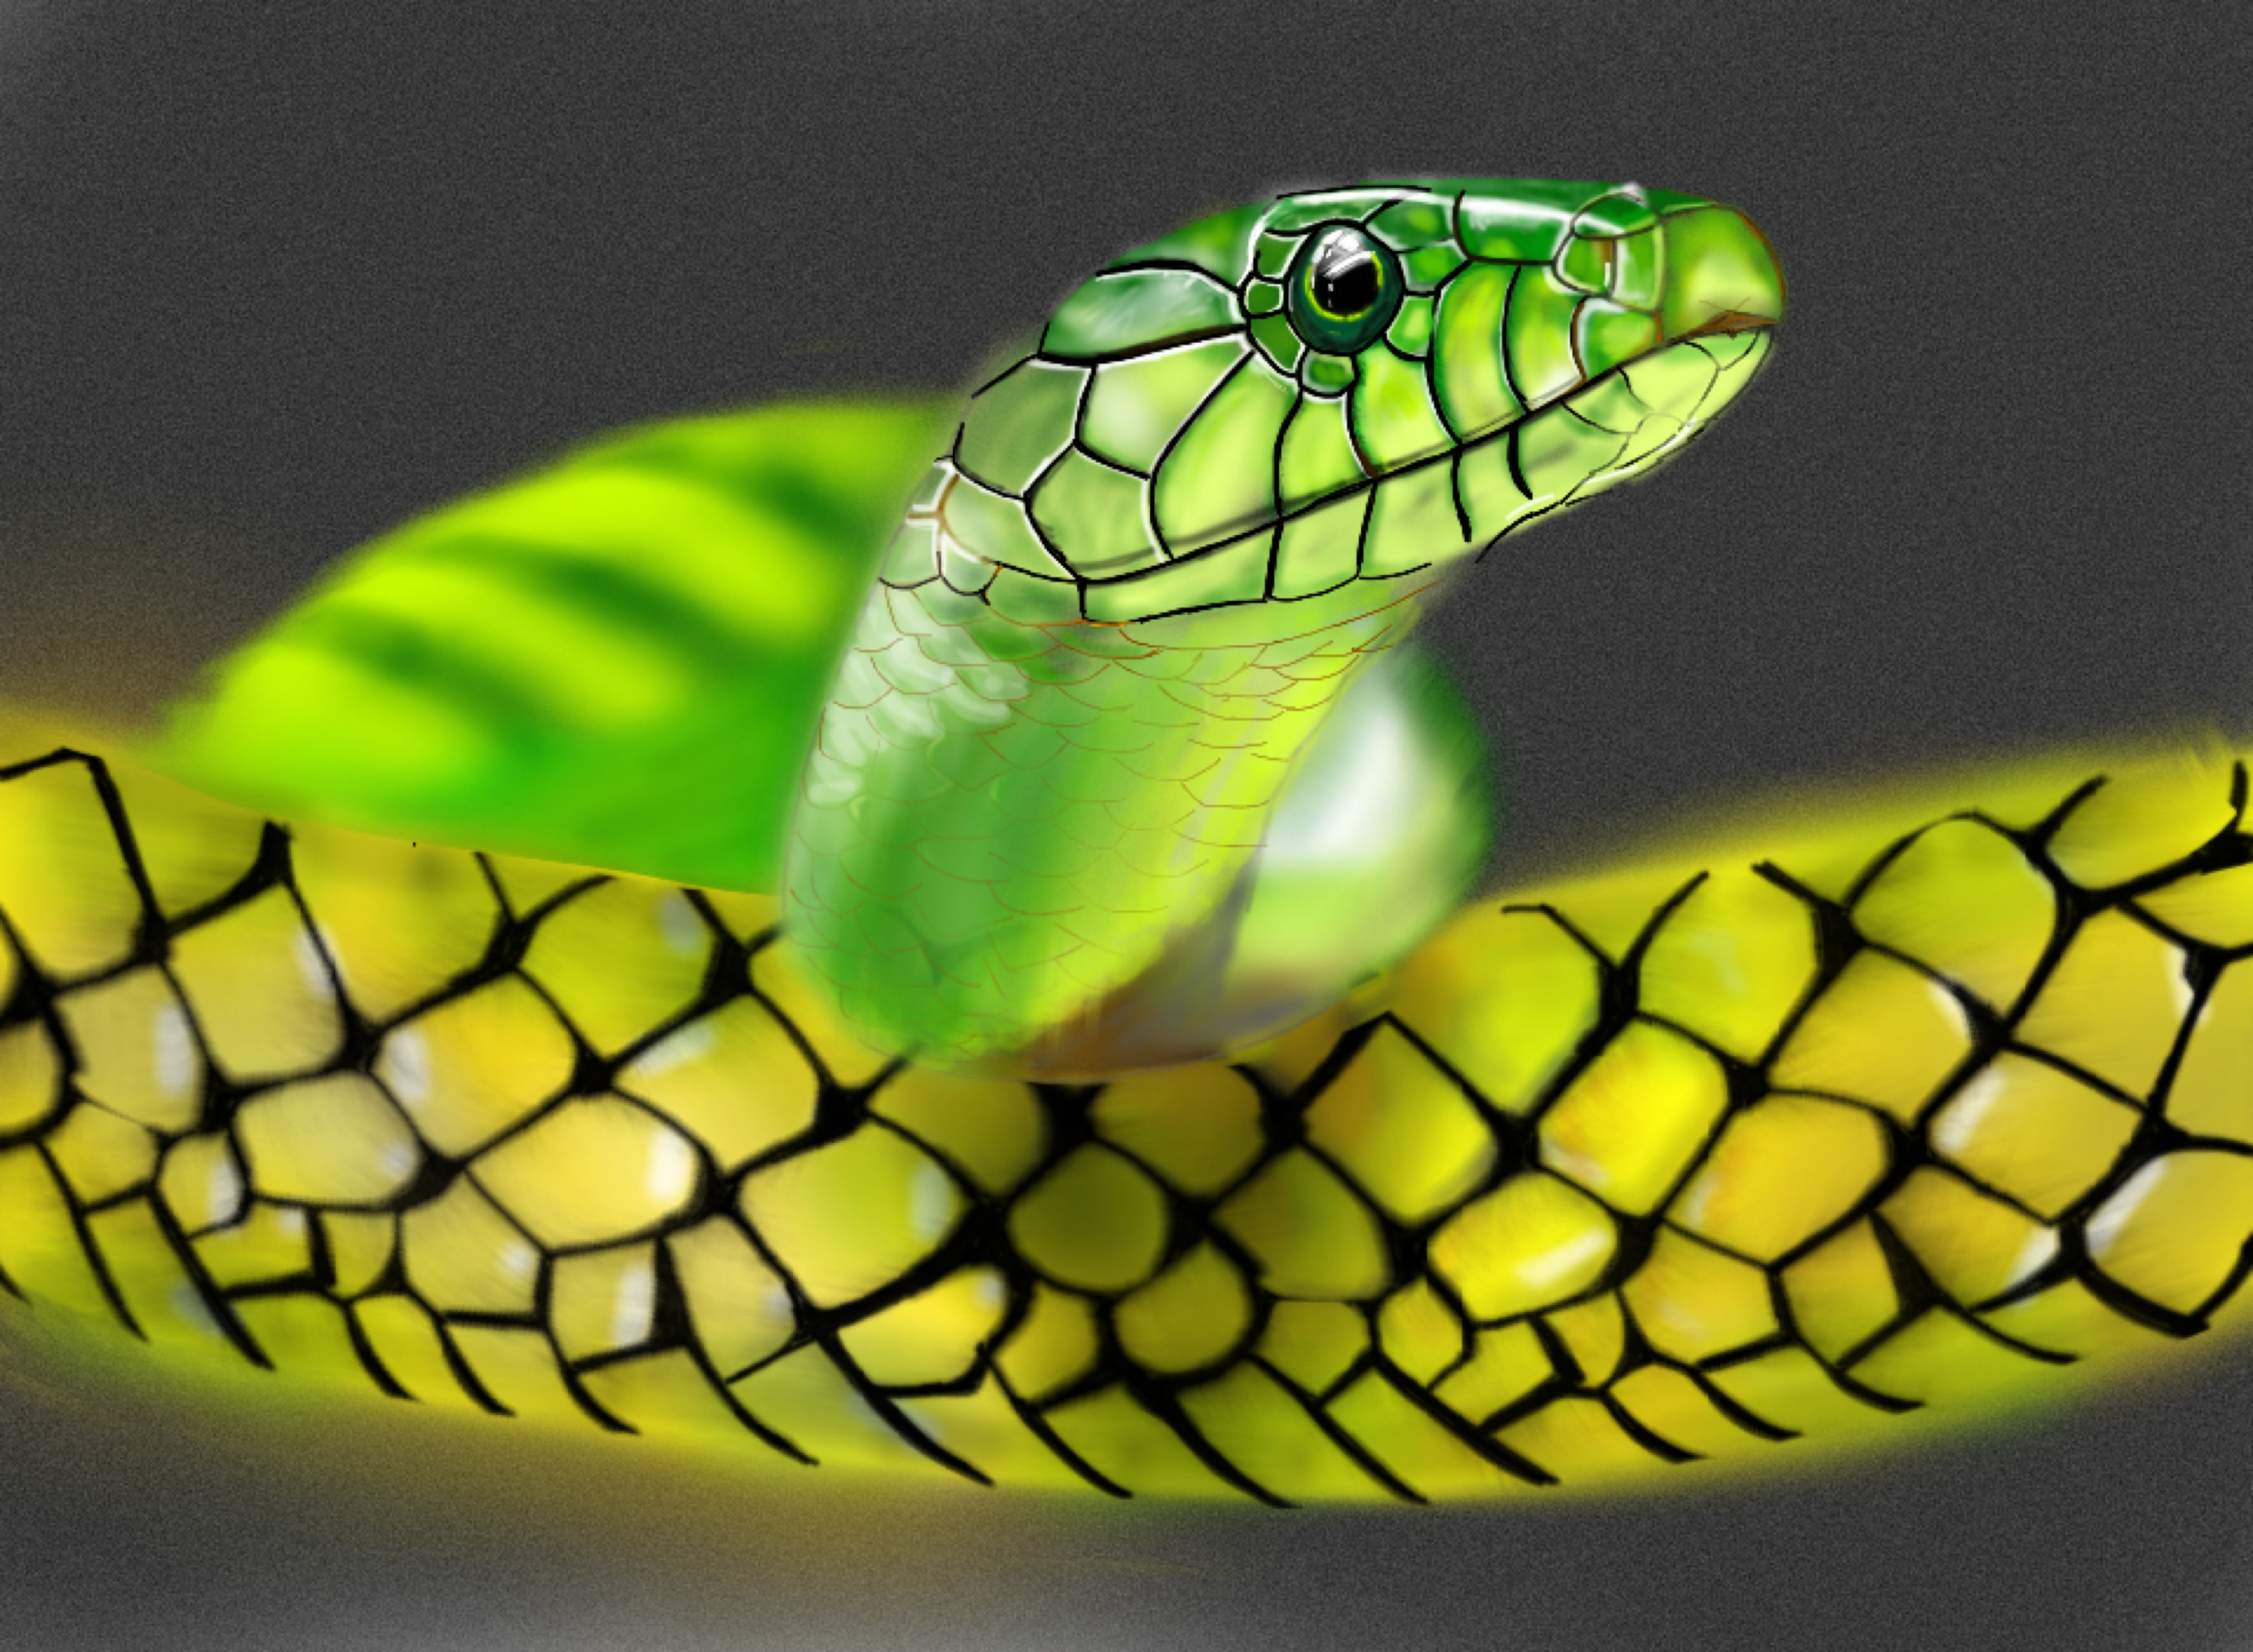 hd images of snakes